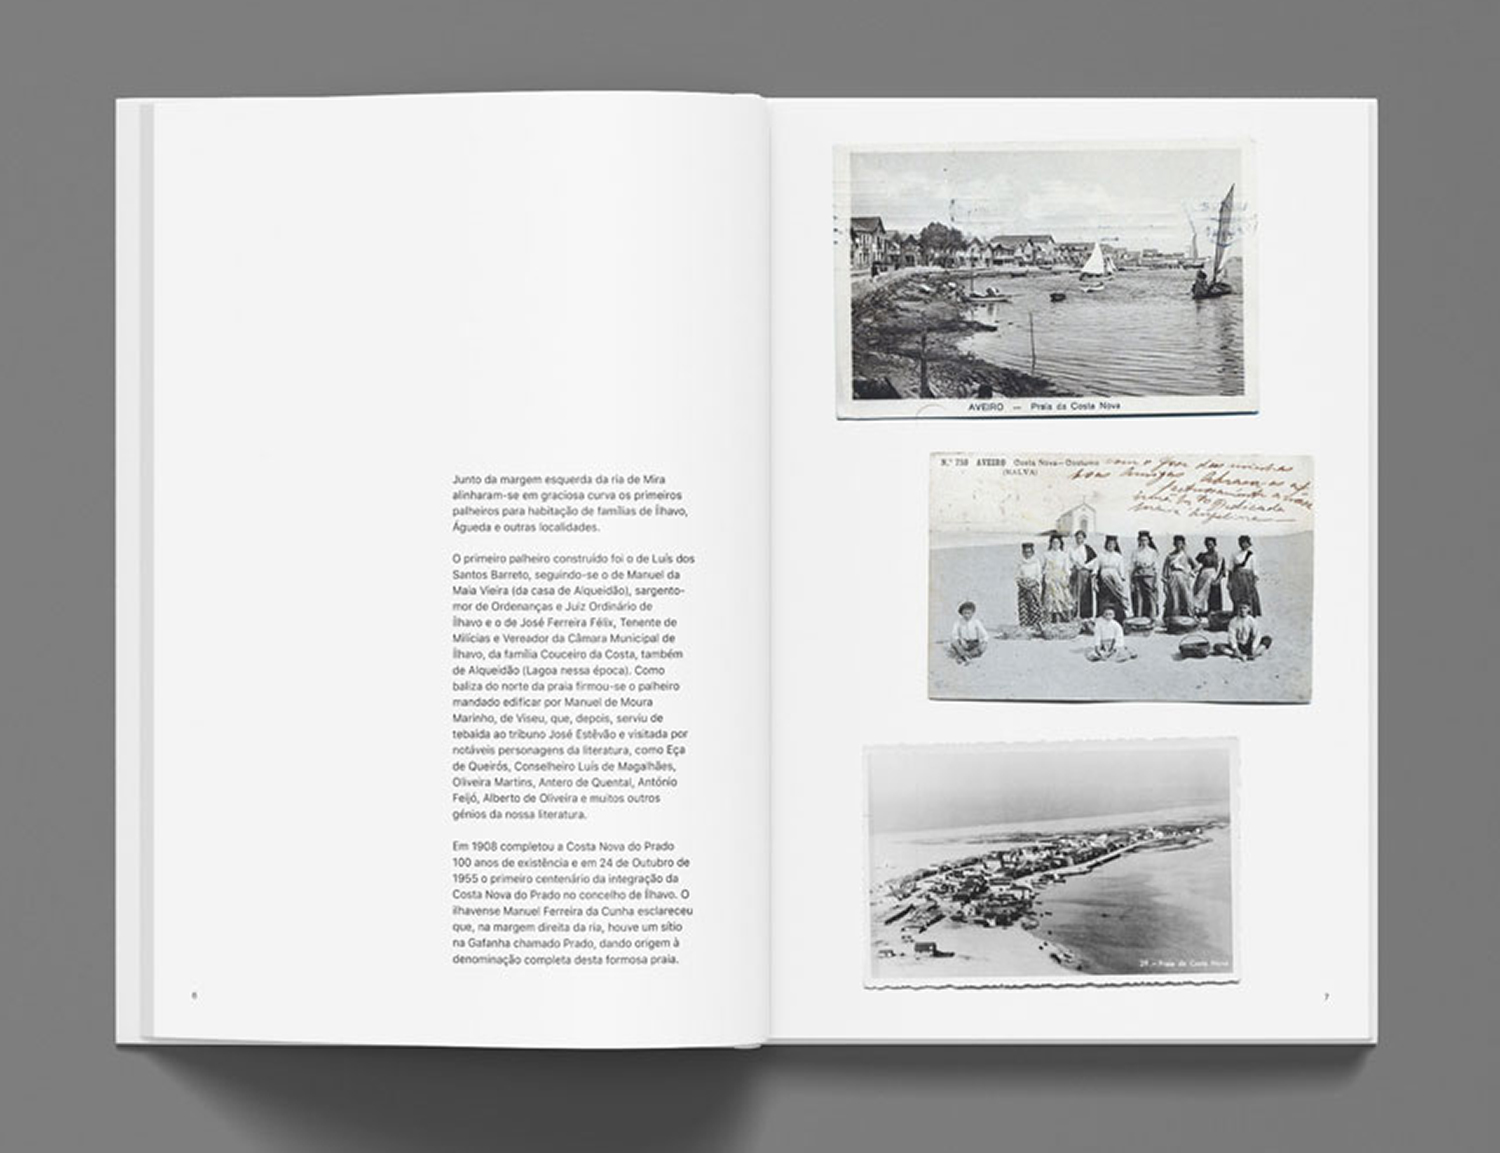 Spread of the book with text and old postcards of Costa Nova.